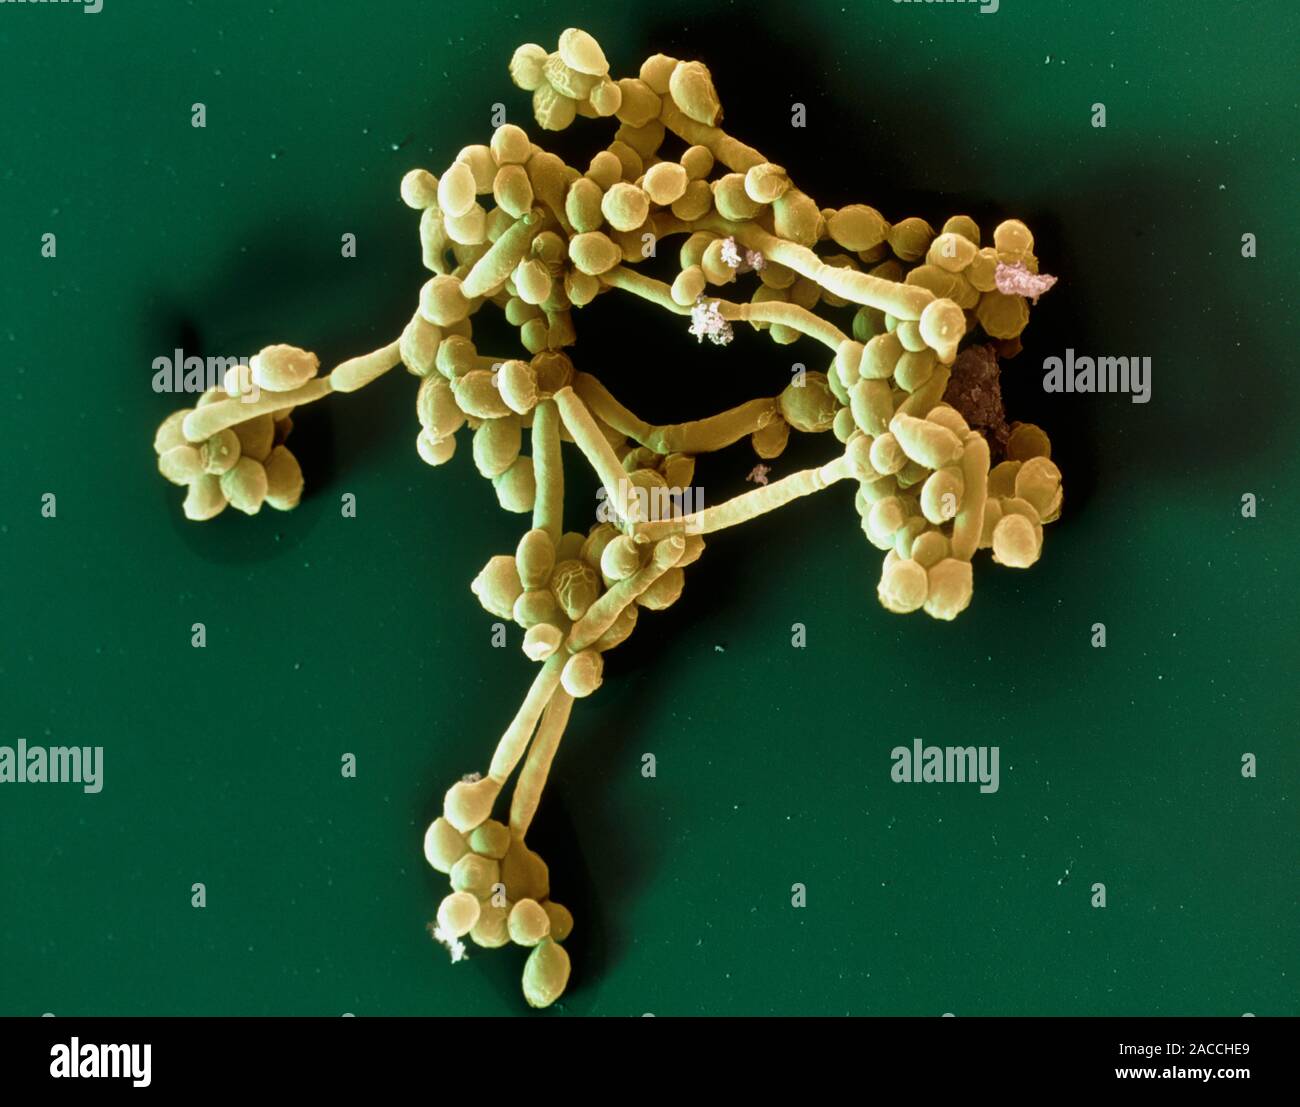 Candida Albicans Fungus Coloured Scanning Electron Micrograph Sem Of Cells Of The Yeast Like 